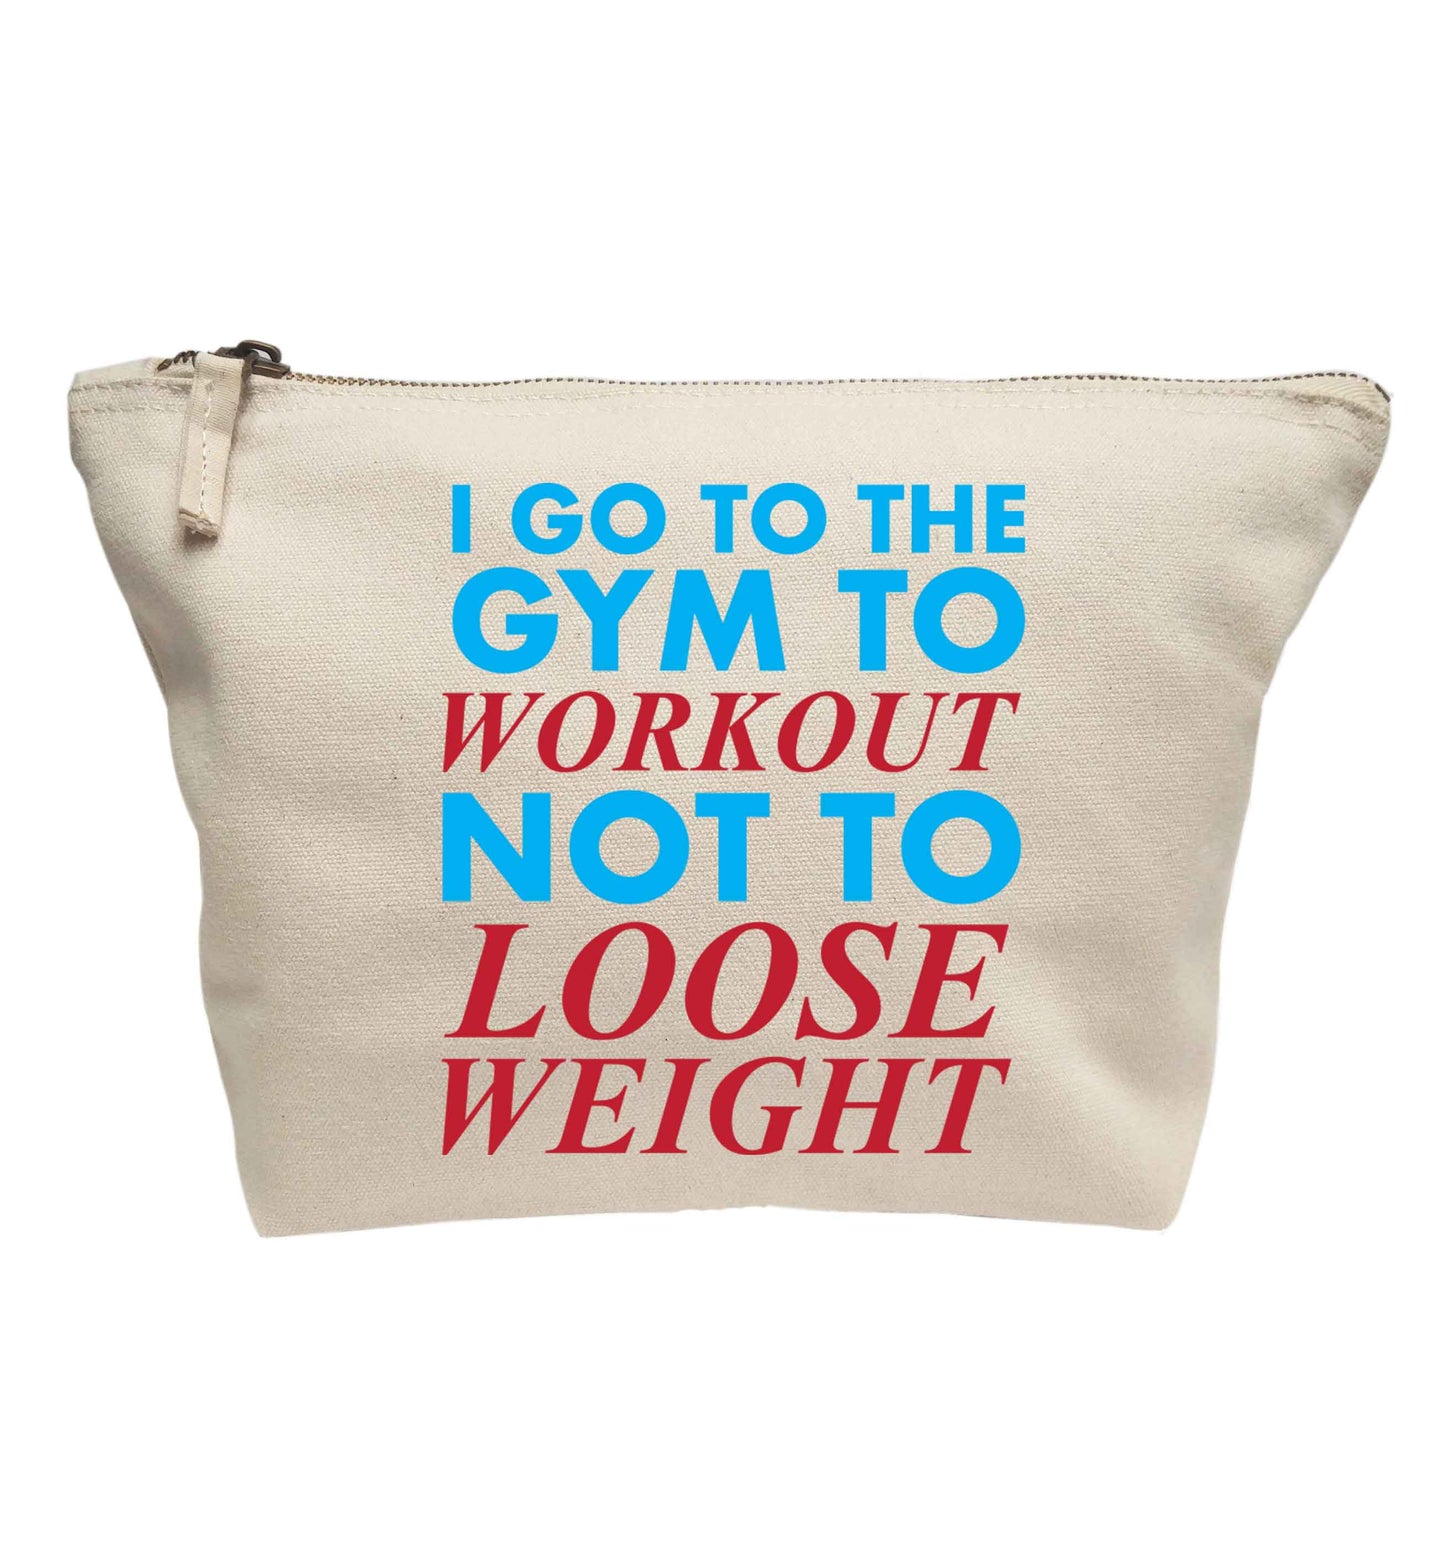 I go to the gym to workout not to loose weight | Makeup / wash bag